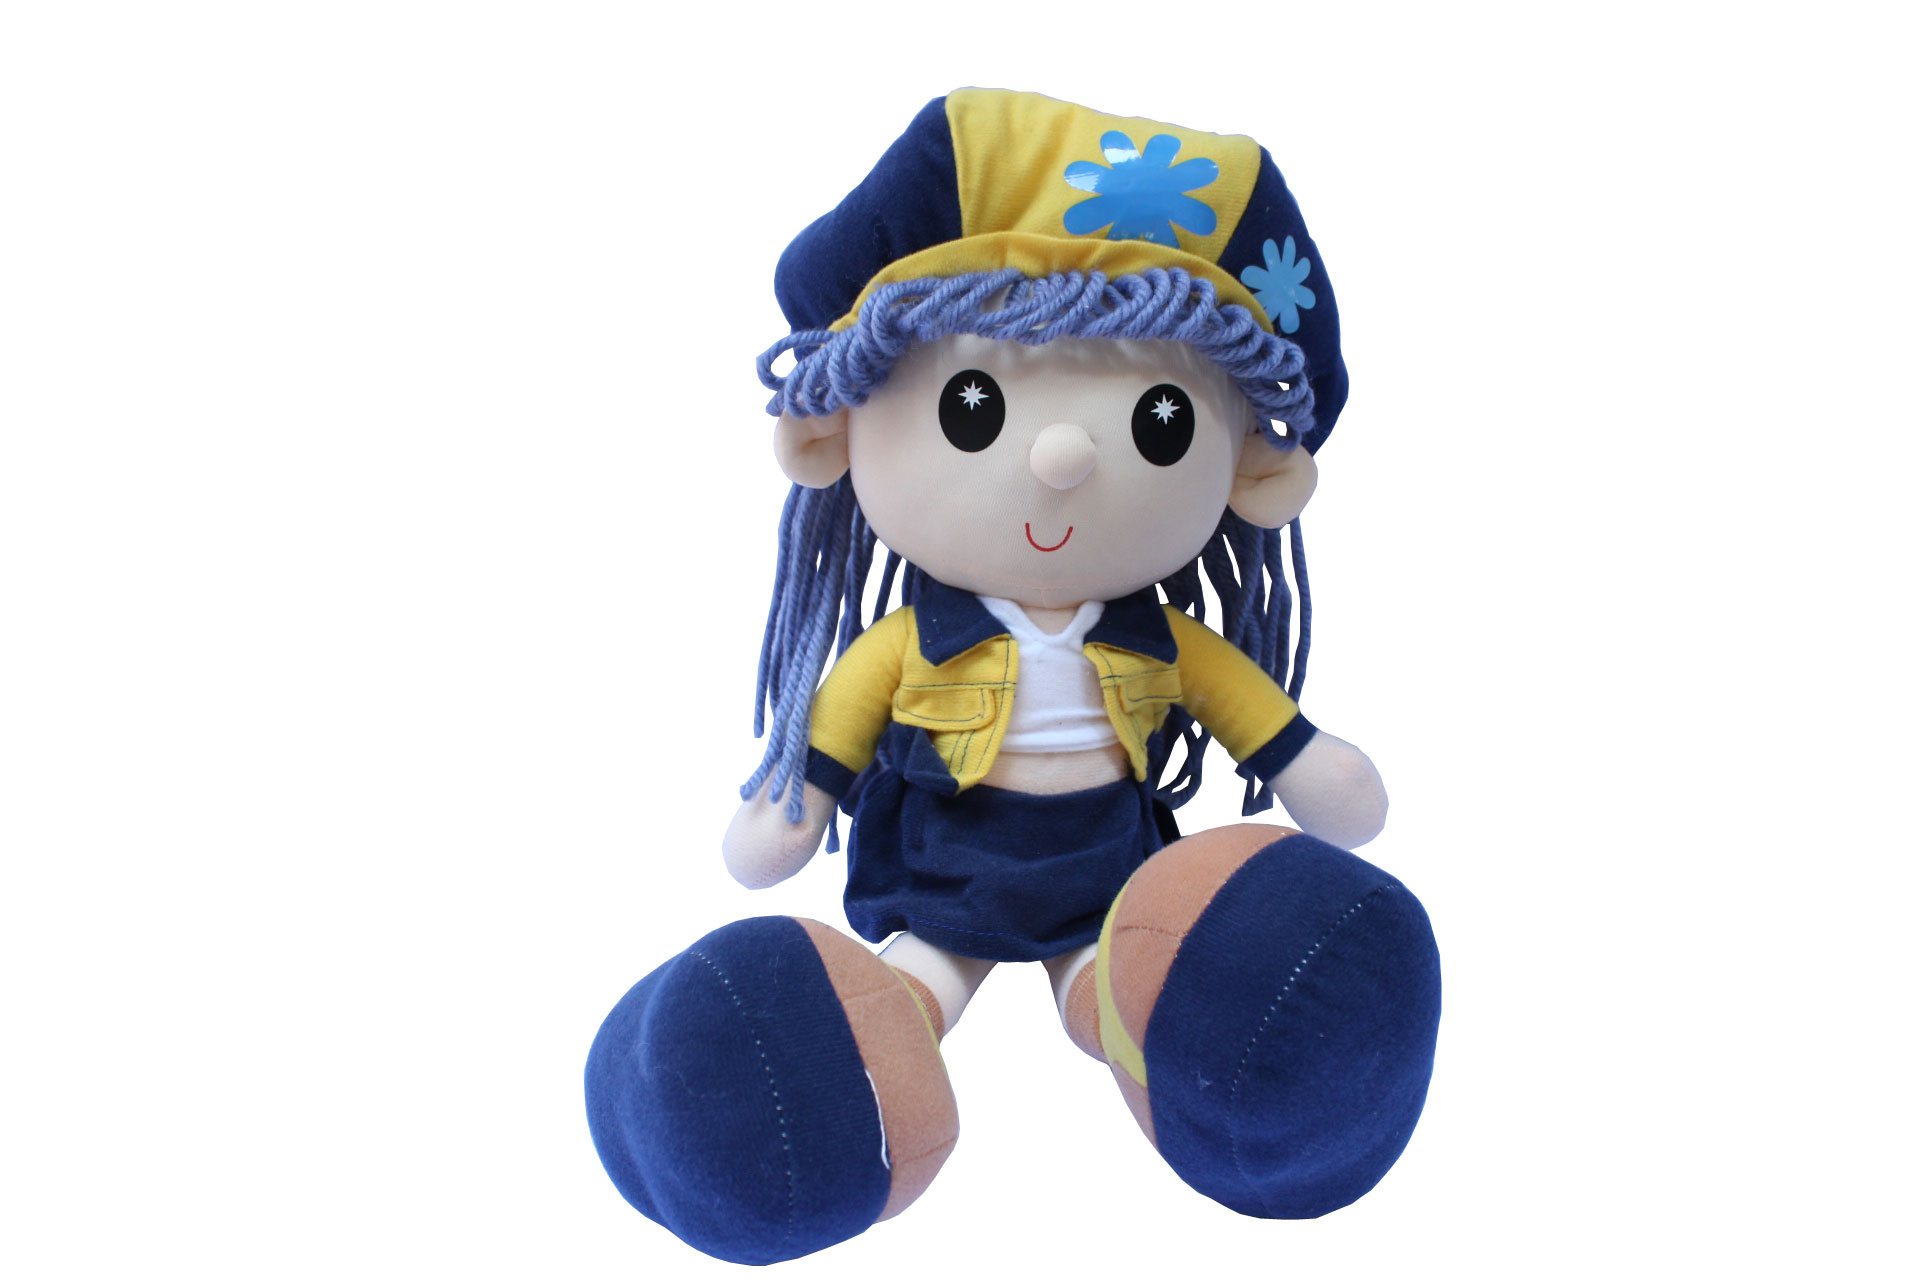 The new creative yuppie cloth doll plush toy doll children's Day gifts for the kids in the kindergarten year gifts gift company4